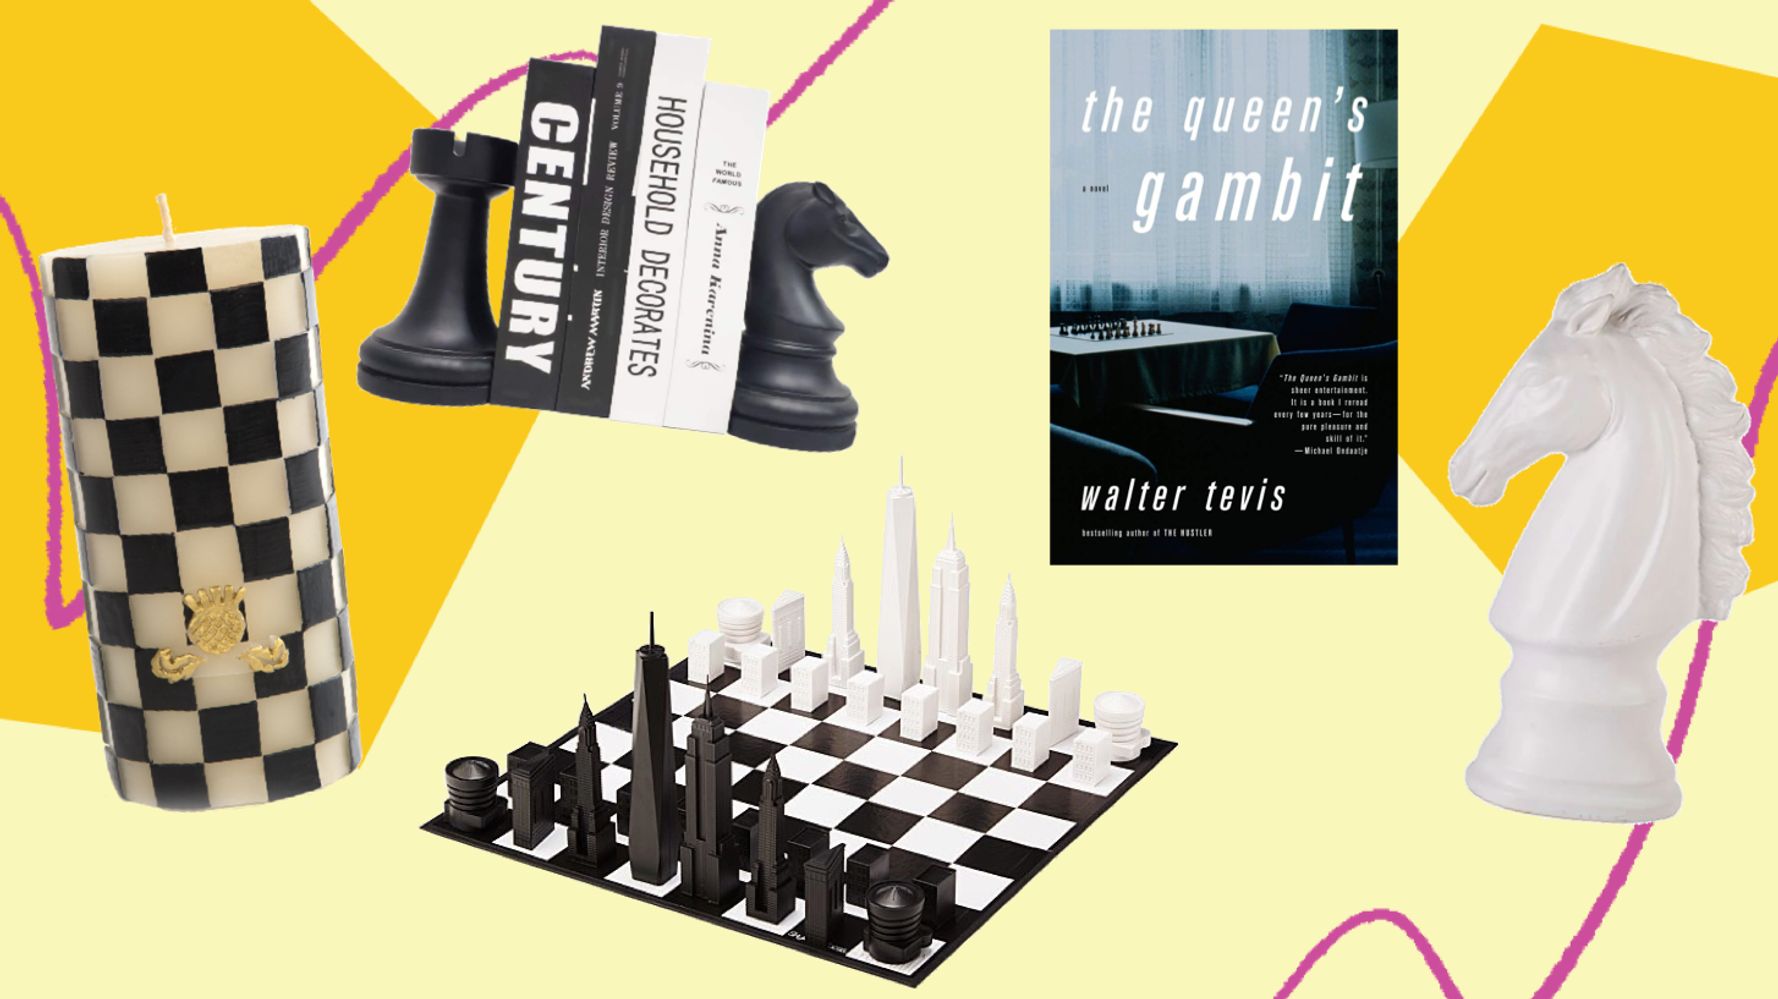 Is The Queens Gambit Based on a True Story? Plot and Ending Explained - News